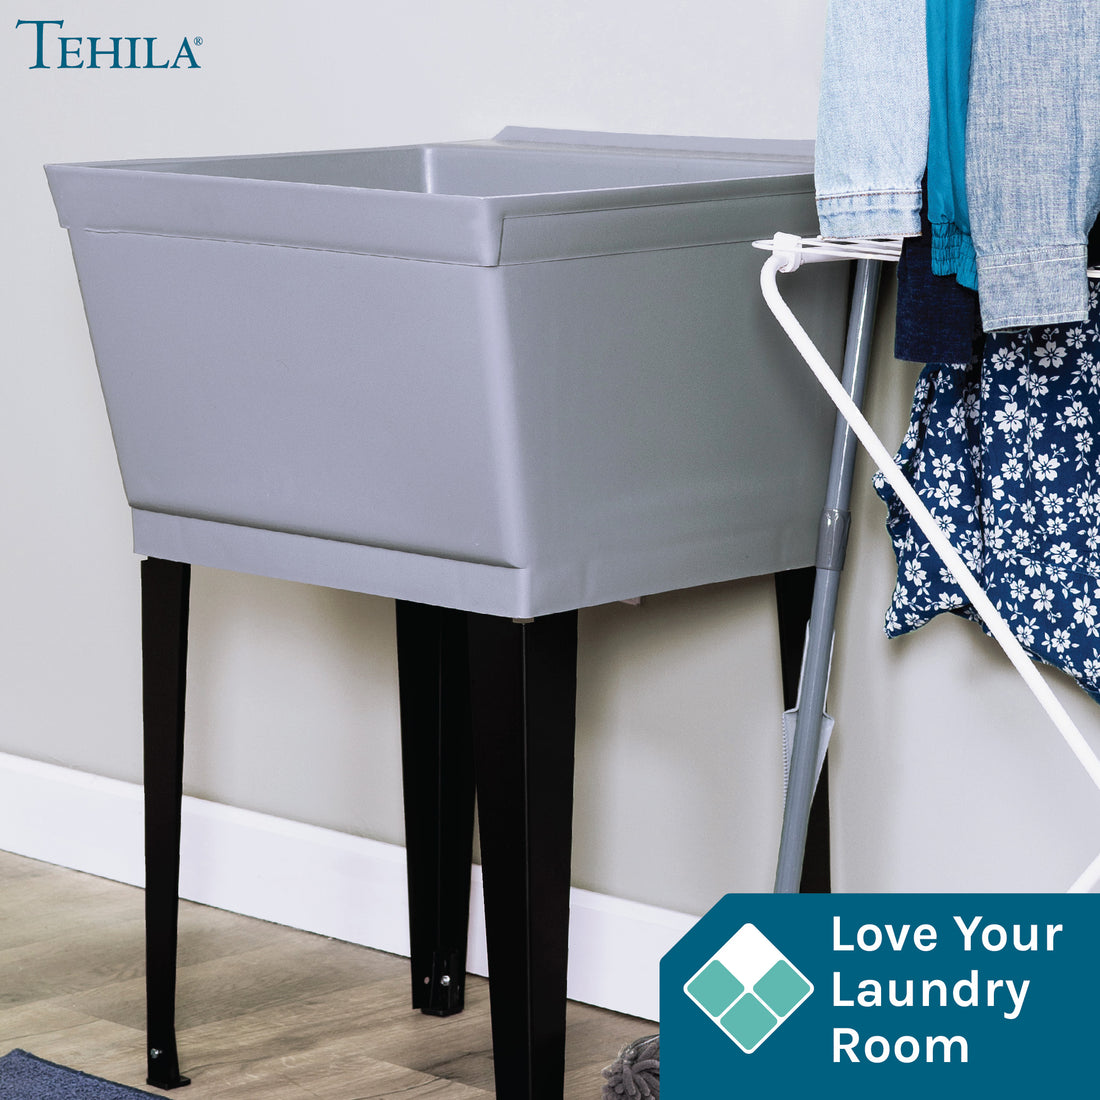 Grey Standard Utility Sink Love Your Laundry Room